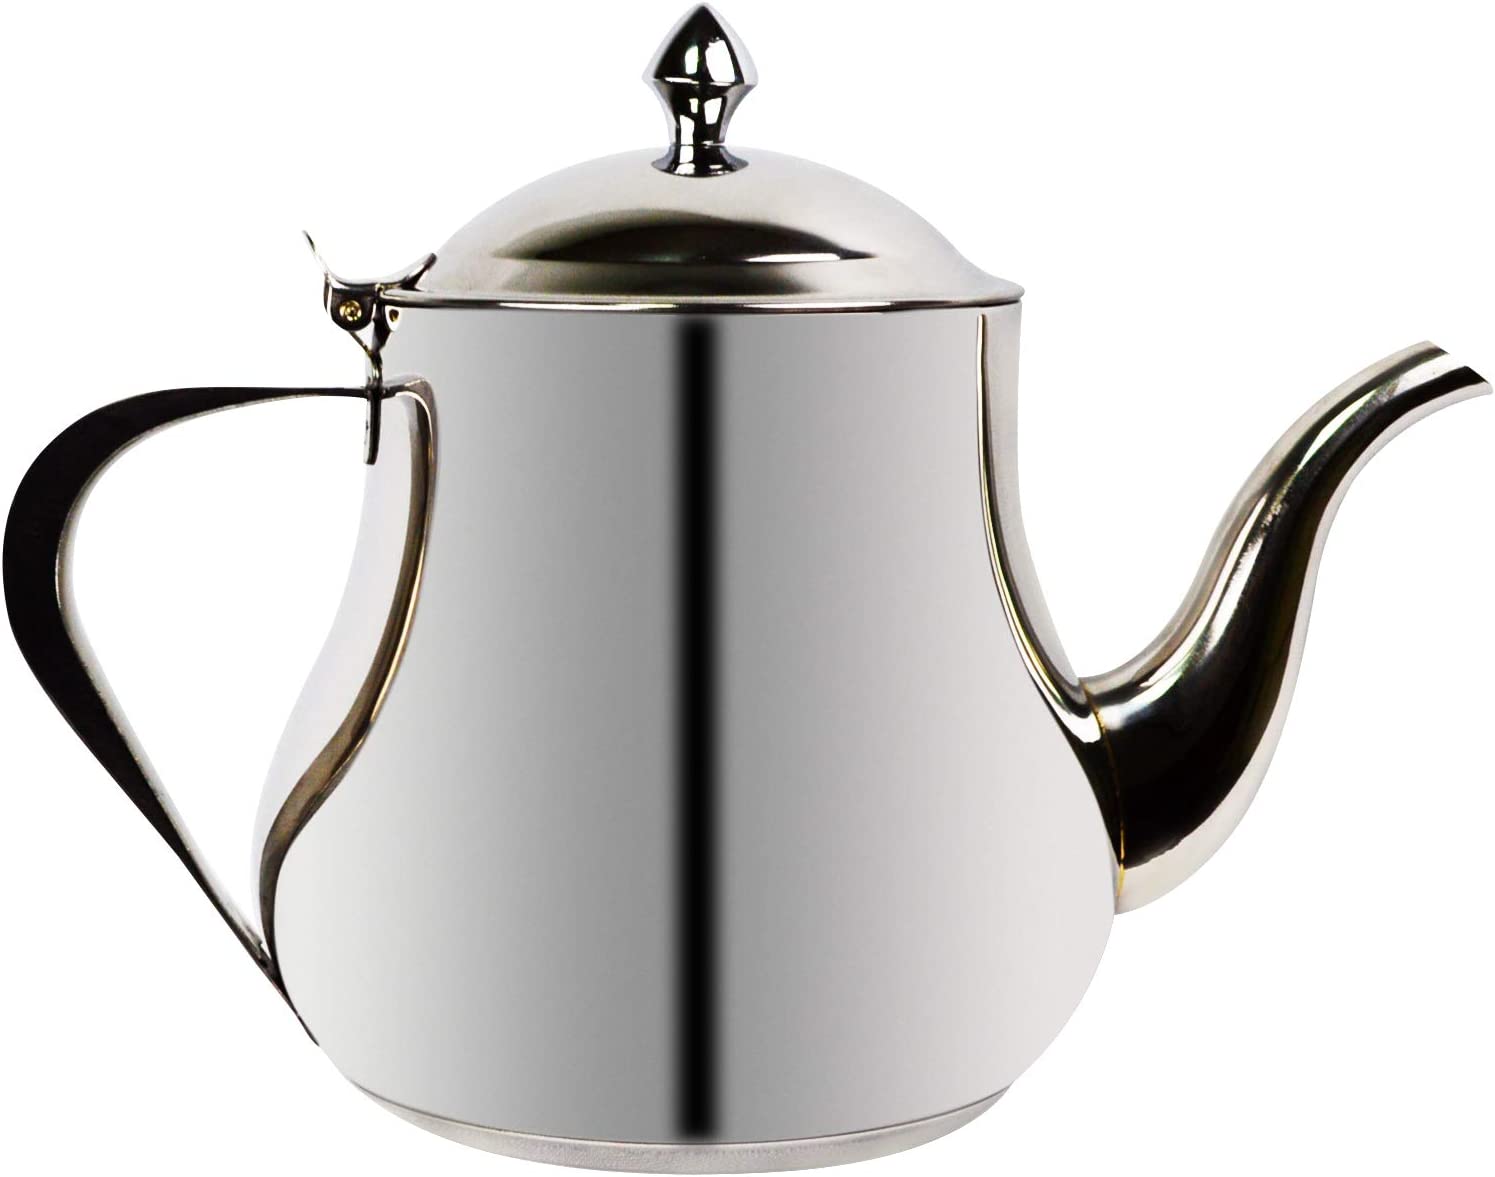 Ramadan24 Stainless Steel Teapot with Induction | Moroccan Arabic Design | with Lid Tea Filter Spout & Handles | 3-in-1 Also as Coffee Pot, Kettle (2 Litres)